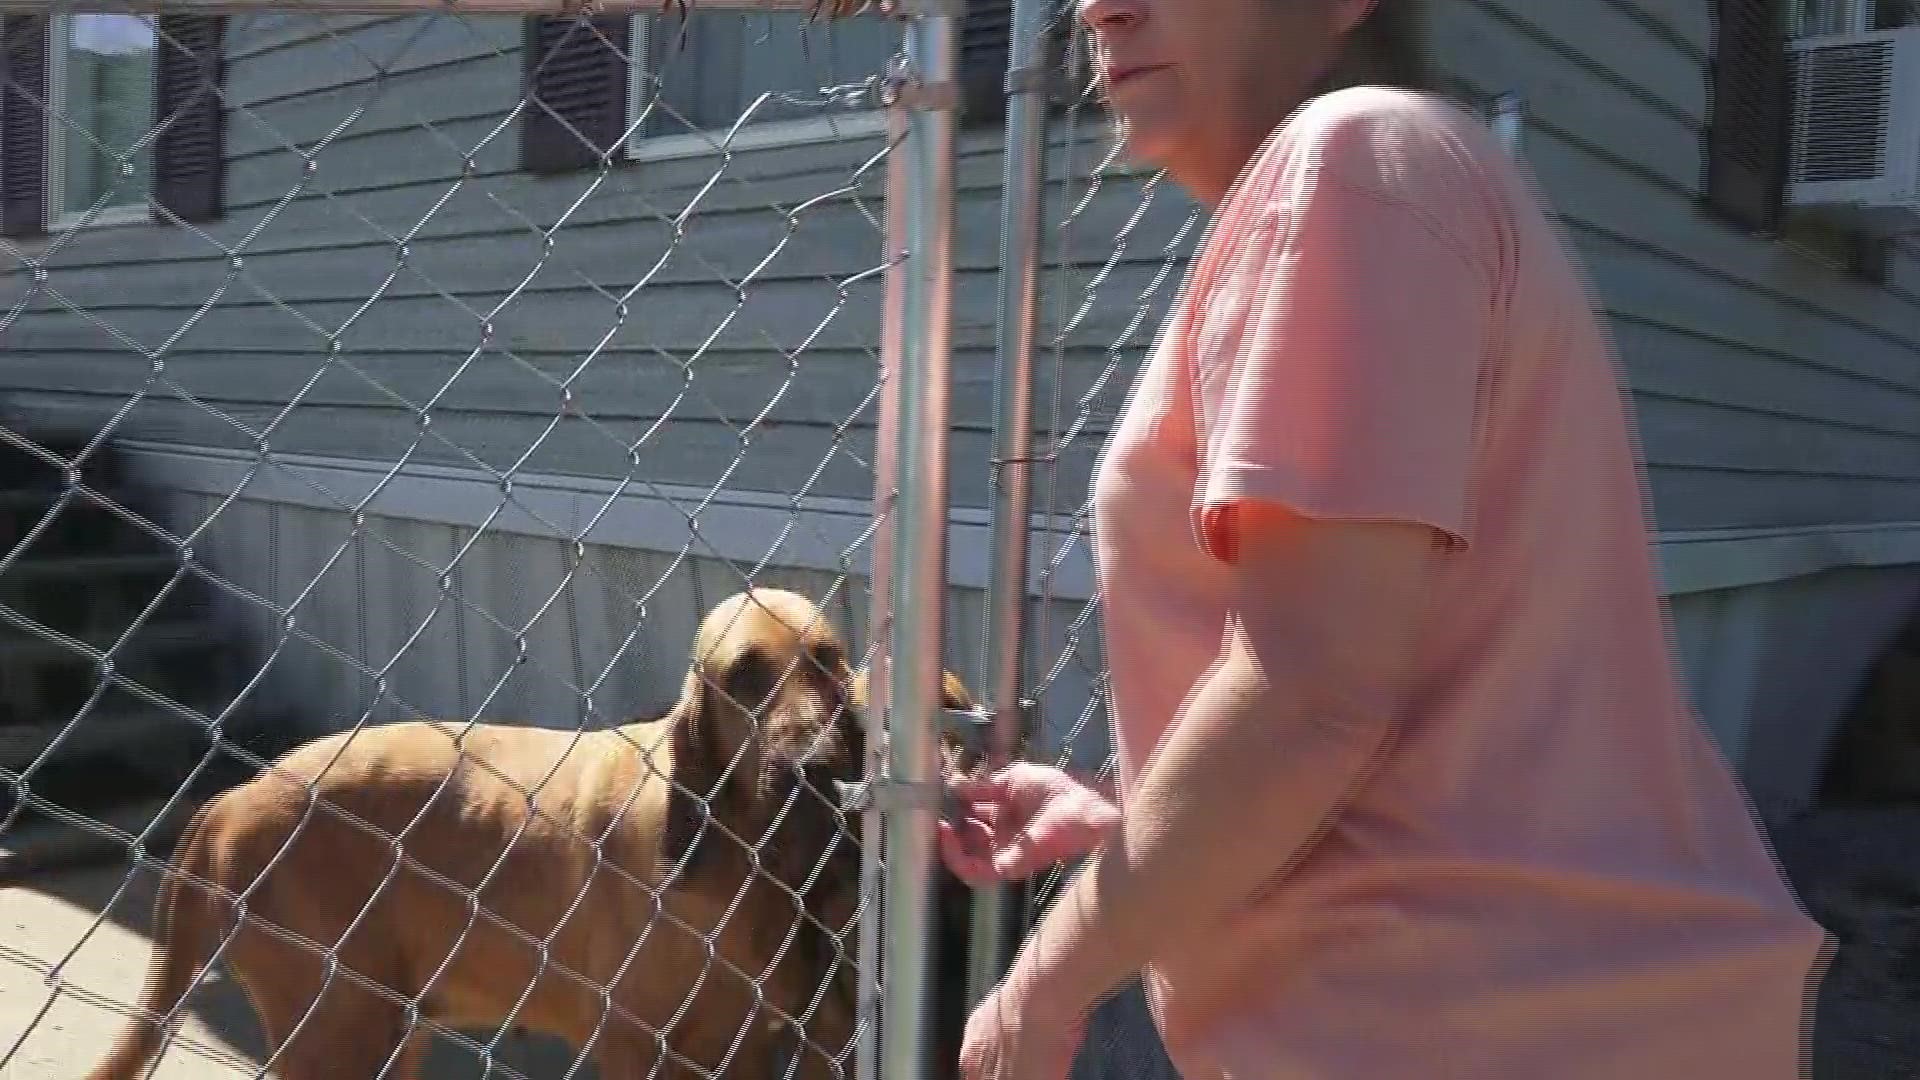 An event on Saturday in Powell will help the sanctuary feed more dogs in need.